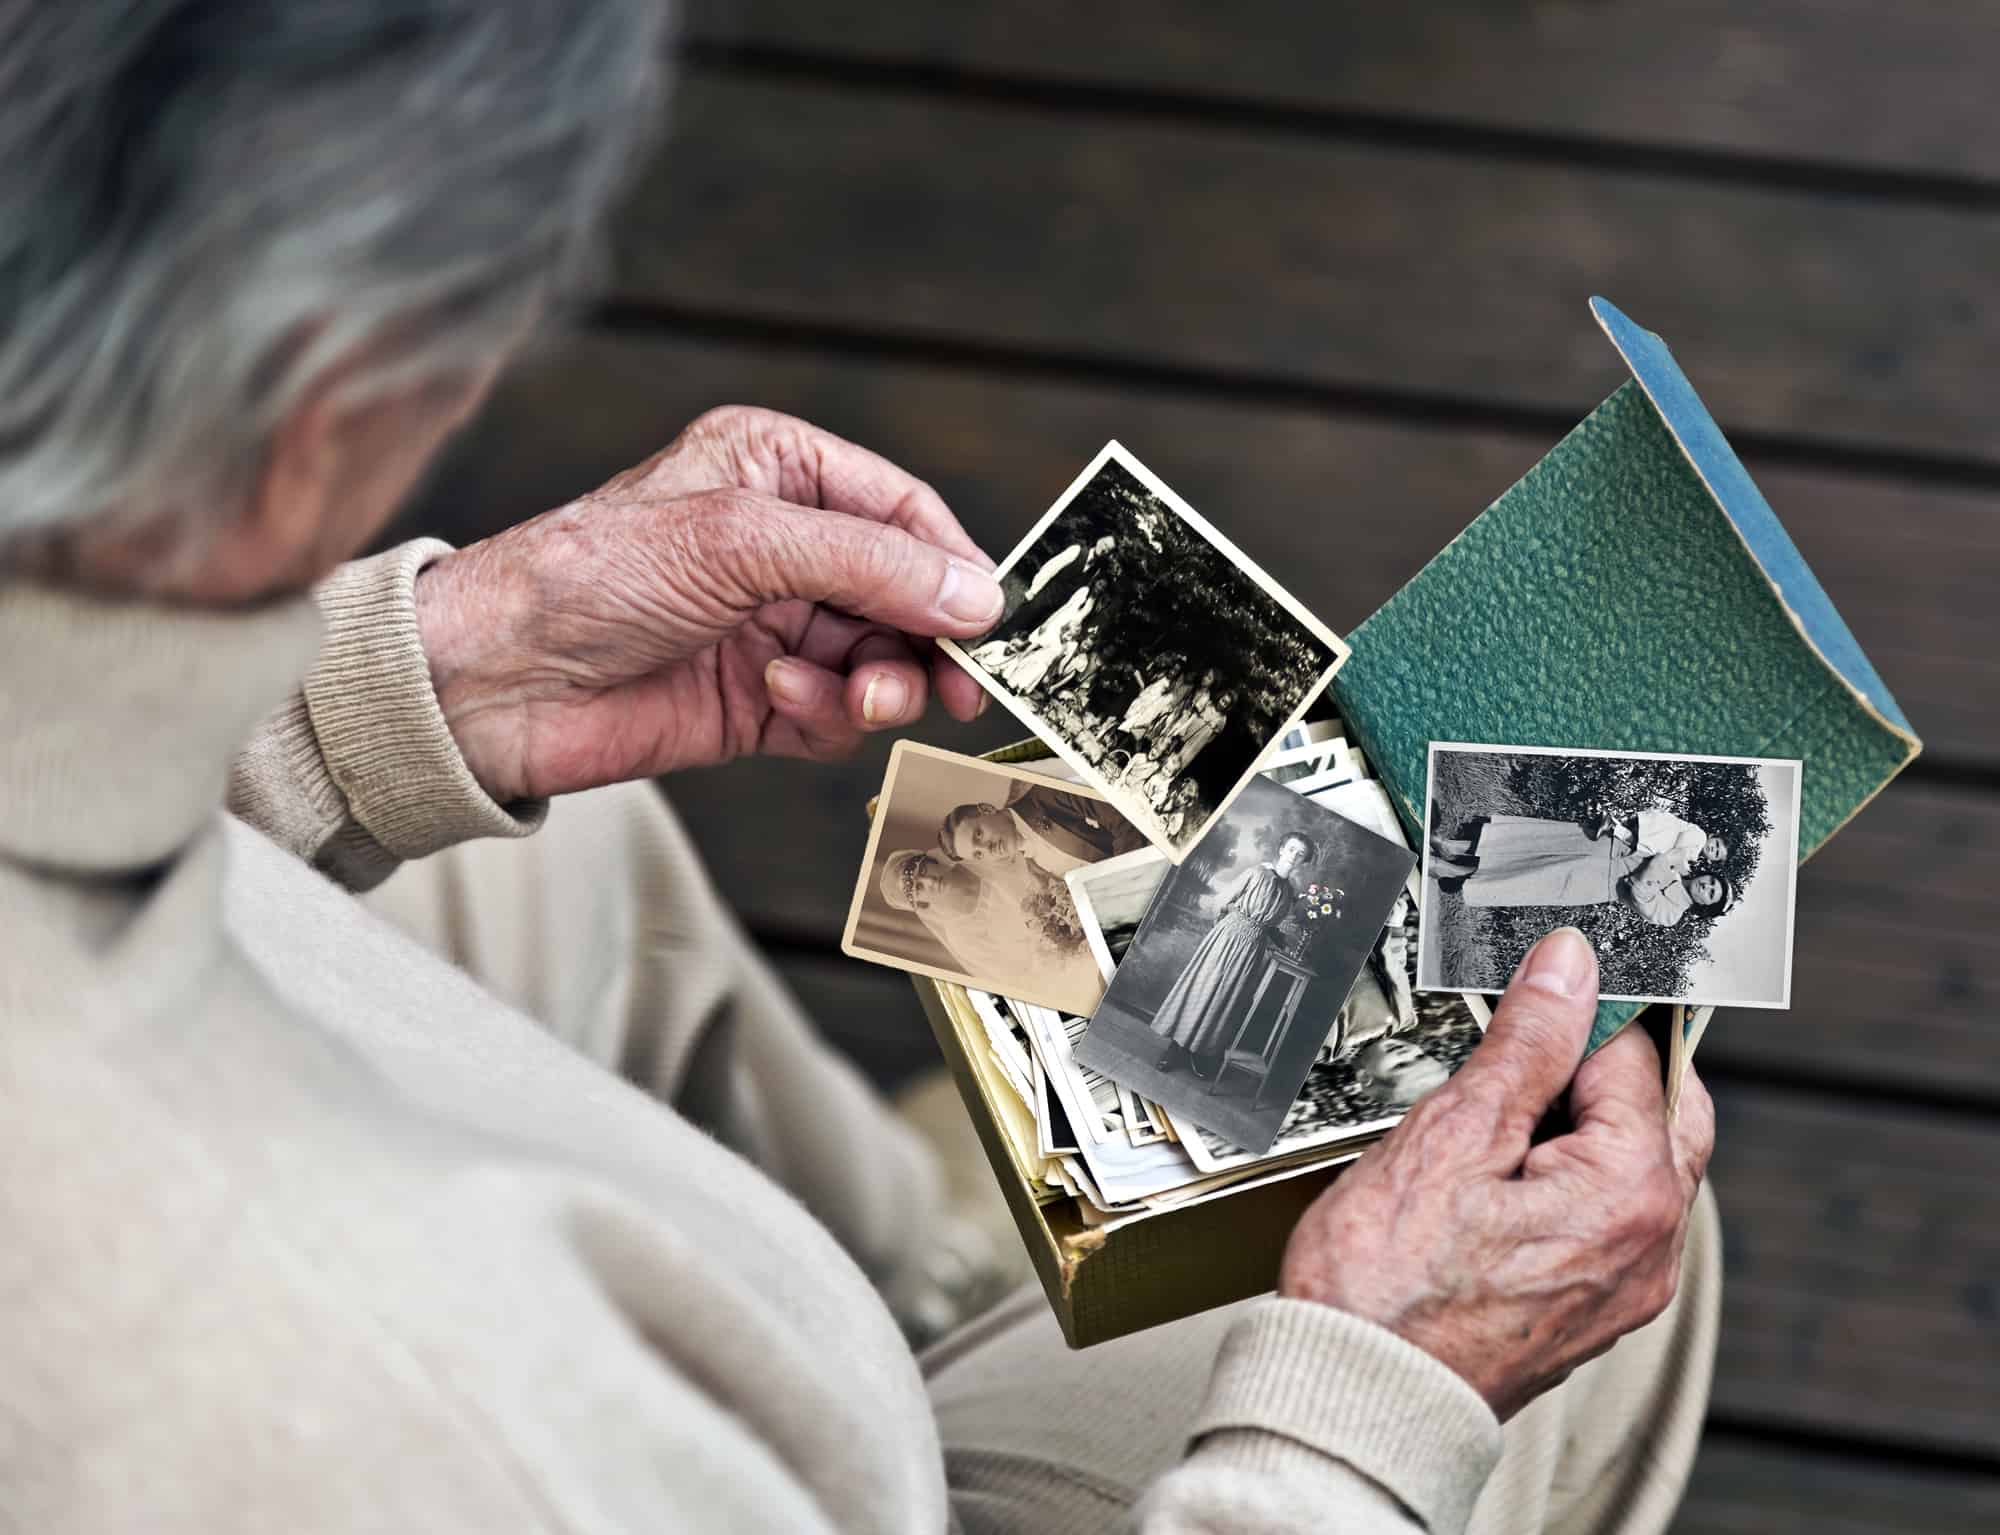 Elderly lady looking at old photos